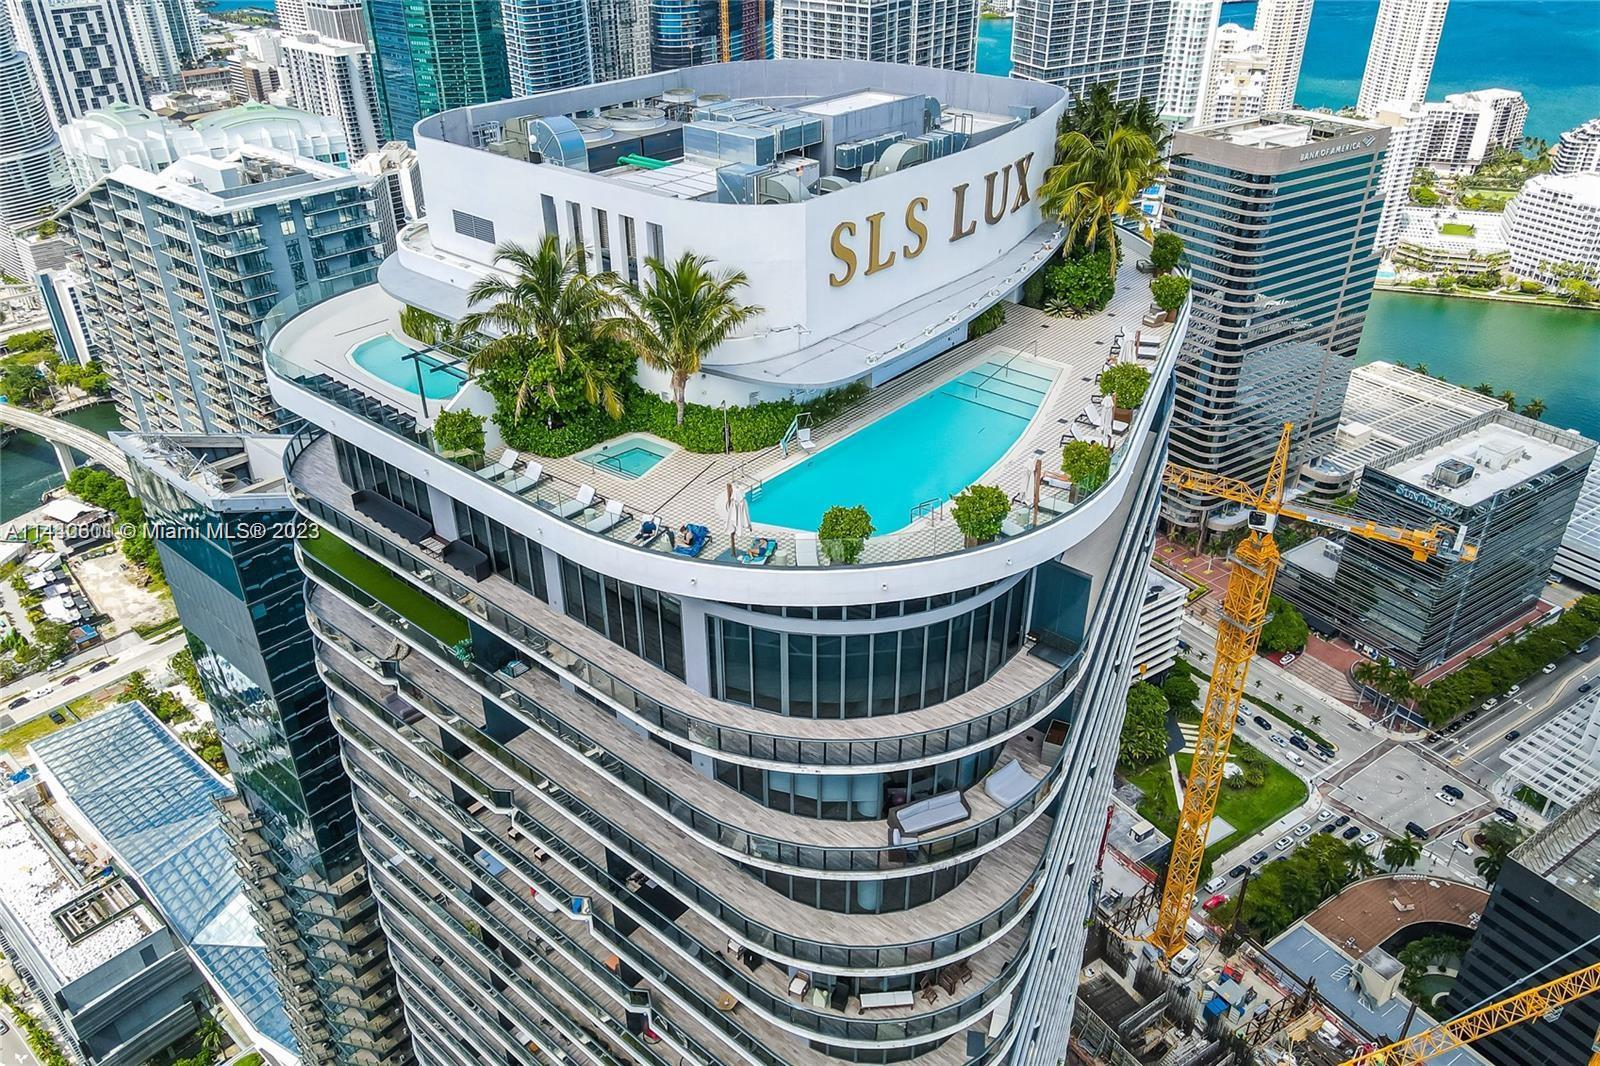 One of the Best Views this City has to offer as you literally have Brickell at your Finger Tips from every angle ! A world Renowned Brand , I welcome you to this amazing opportunity at the SLS LUX ! With your very own Private Elevator/Foyer that opens up to this Impeccable floor plan that consists of 3 Beds w/Den /4 Baths (1,613 sq ft) , Open kitchen concept w/ subzero wolf appliances , quartz counters, Italkraft cabinets , Floor to Ceiling windows , A Primary En Suite that will be sure to please w/rainfall shower & jacuzzi tub and a wrap around balcony that seems never ending with pristine views of the city skyline (503 sq ft) ! Resort style amenities w/occasional events for residents by pool , Well secured building with patrol 24/7 and guardgate in lobby ! Prime Location in Brickell !